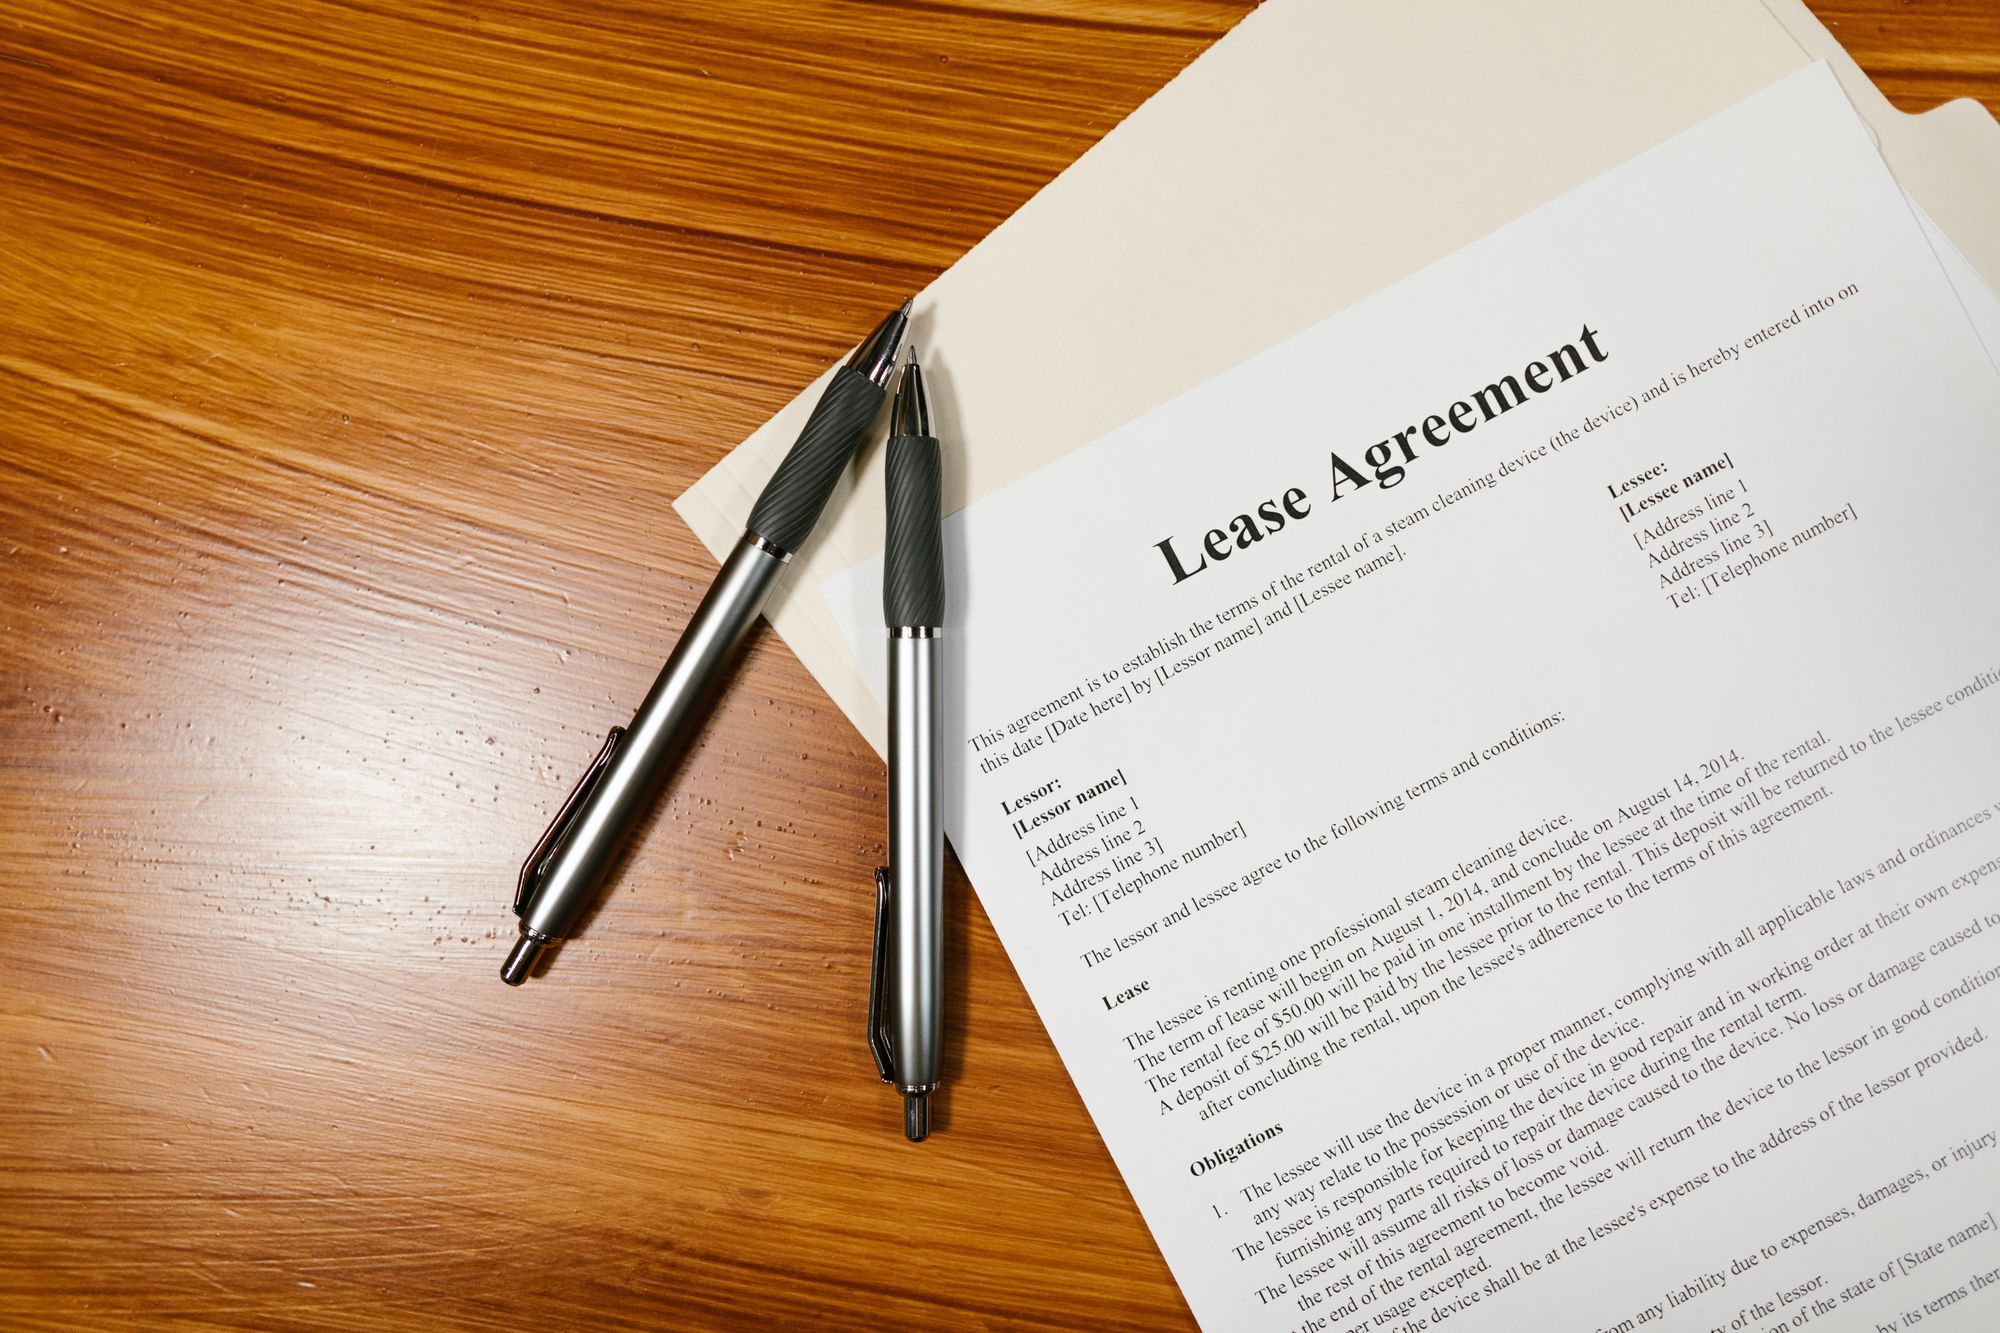 Photo of a printed lease agreement alongside two pens